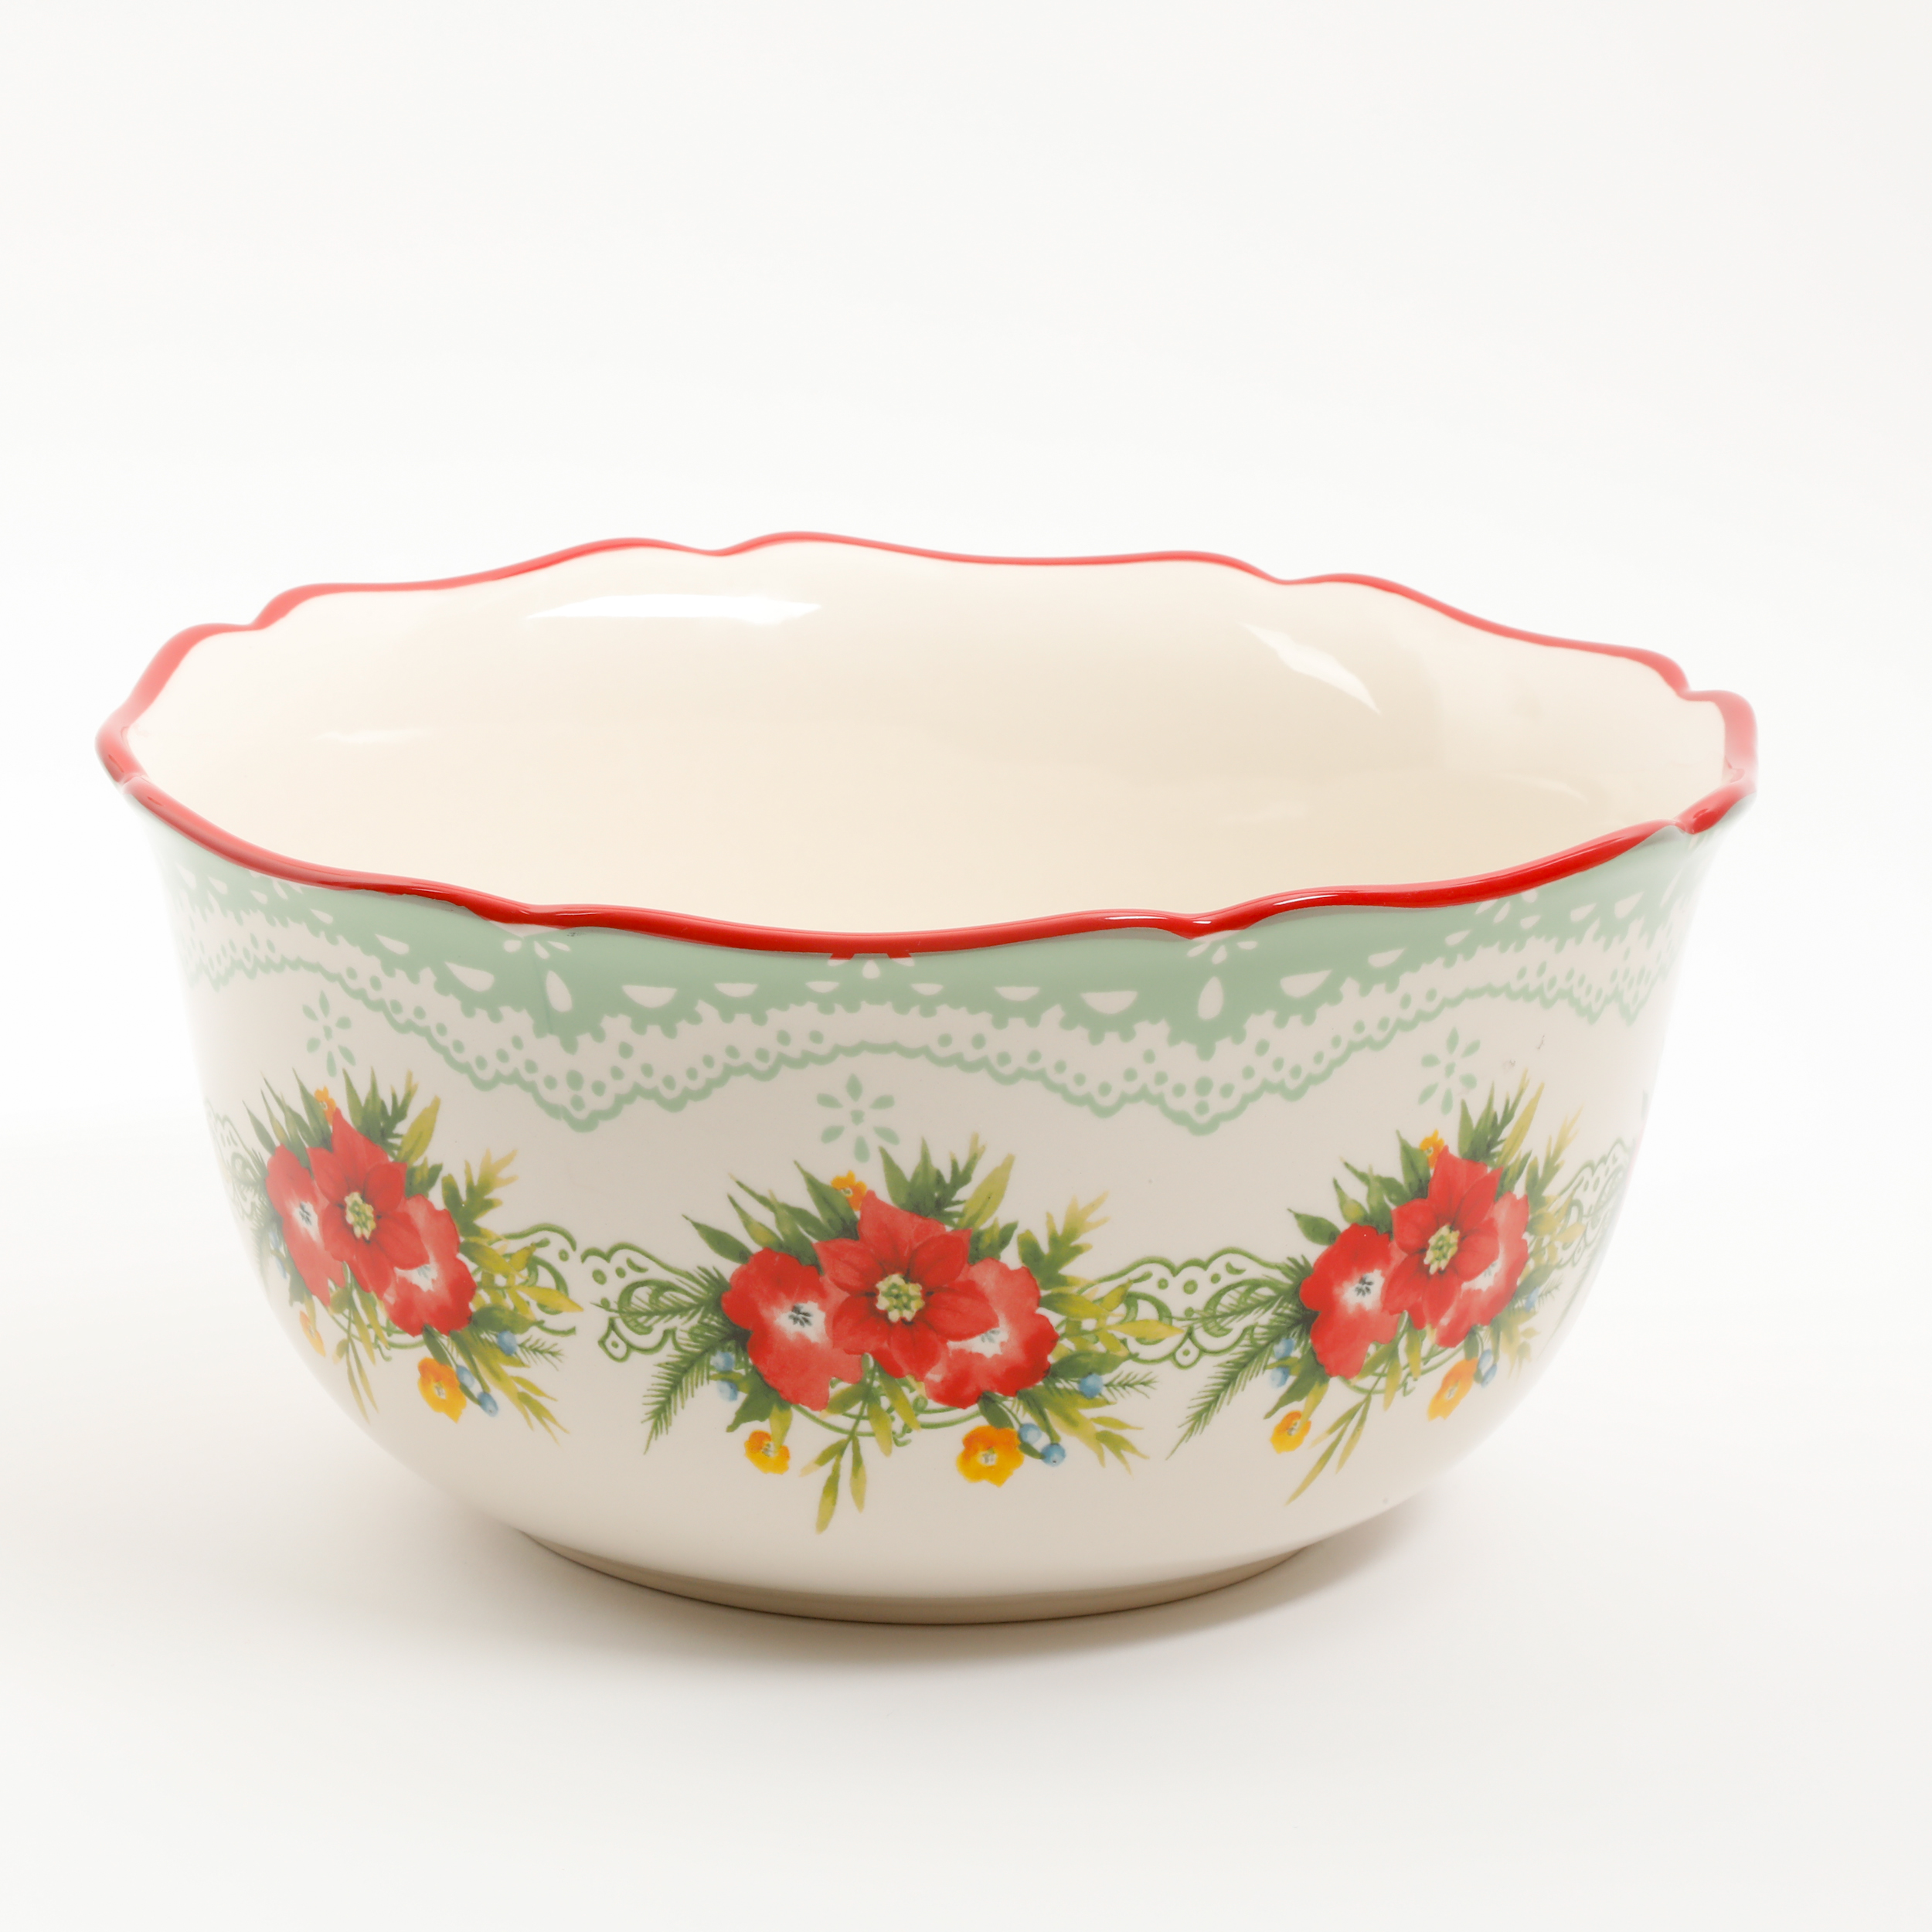 The Pioneer Woman Mint Bowl Set, 3 Piece - image 3 of 5